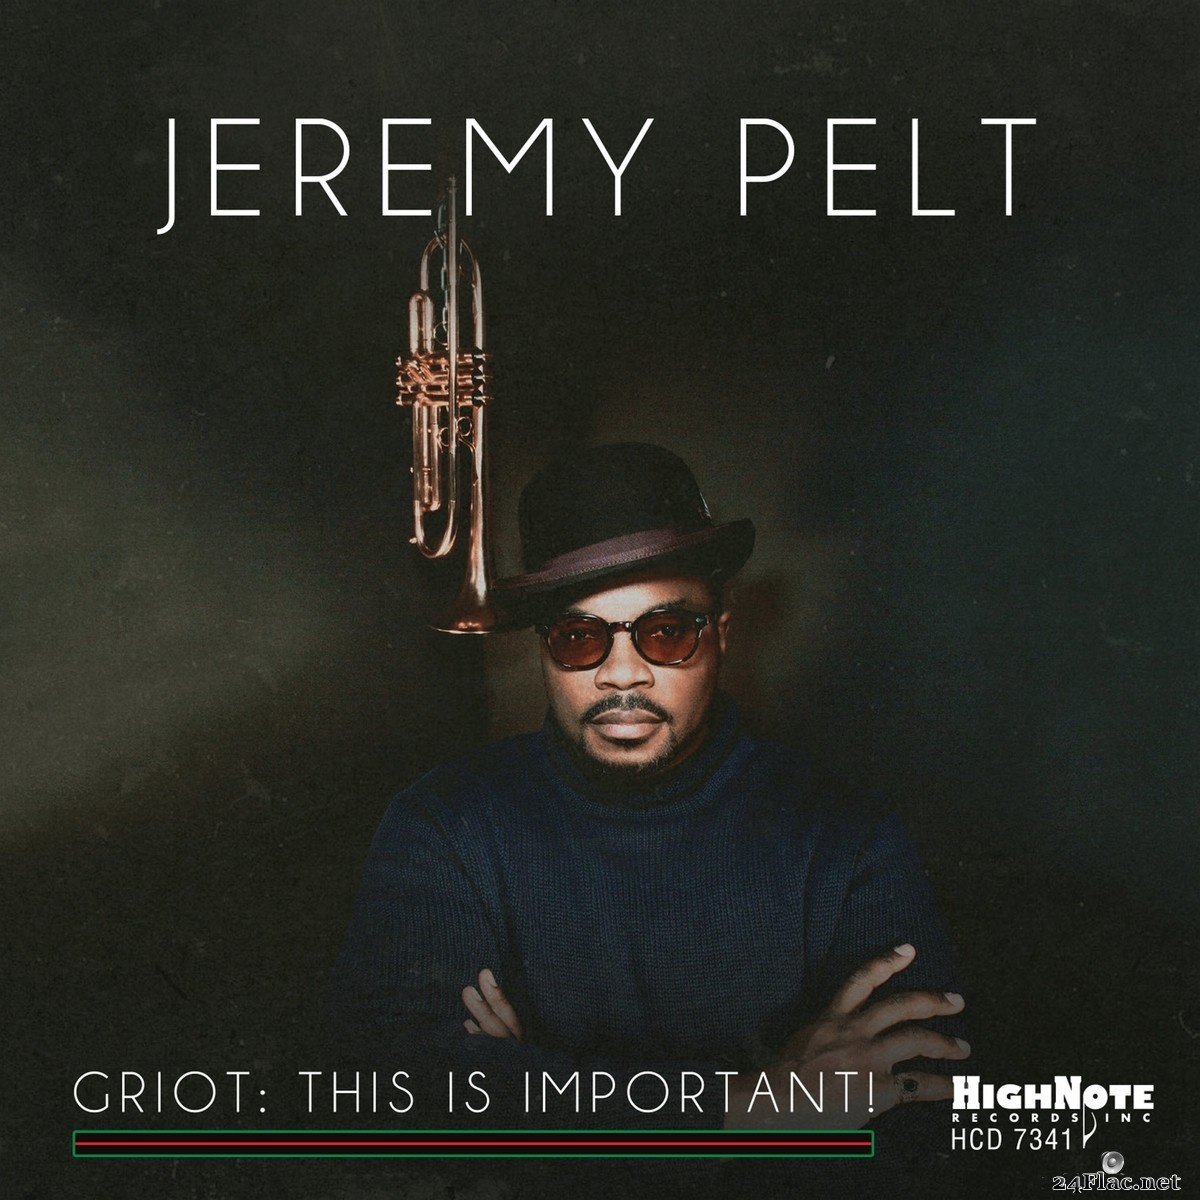 Jeremy Pelt - Griot: This Is Important! (2021) FLAC + Hi-Res